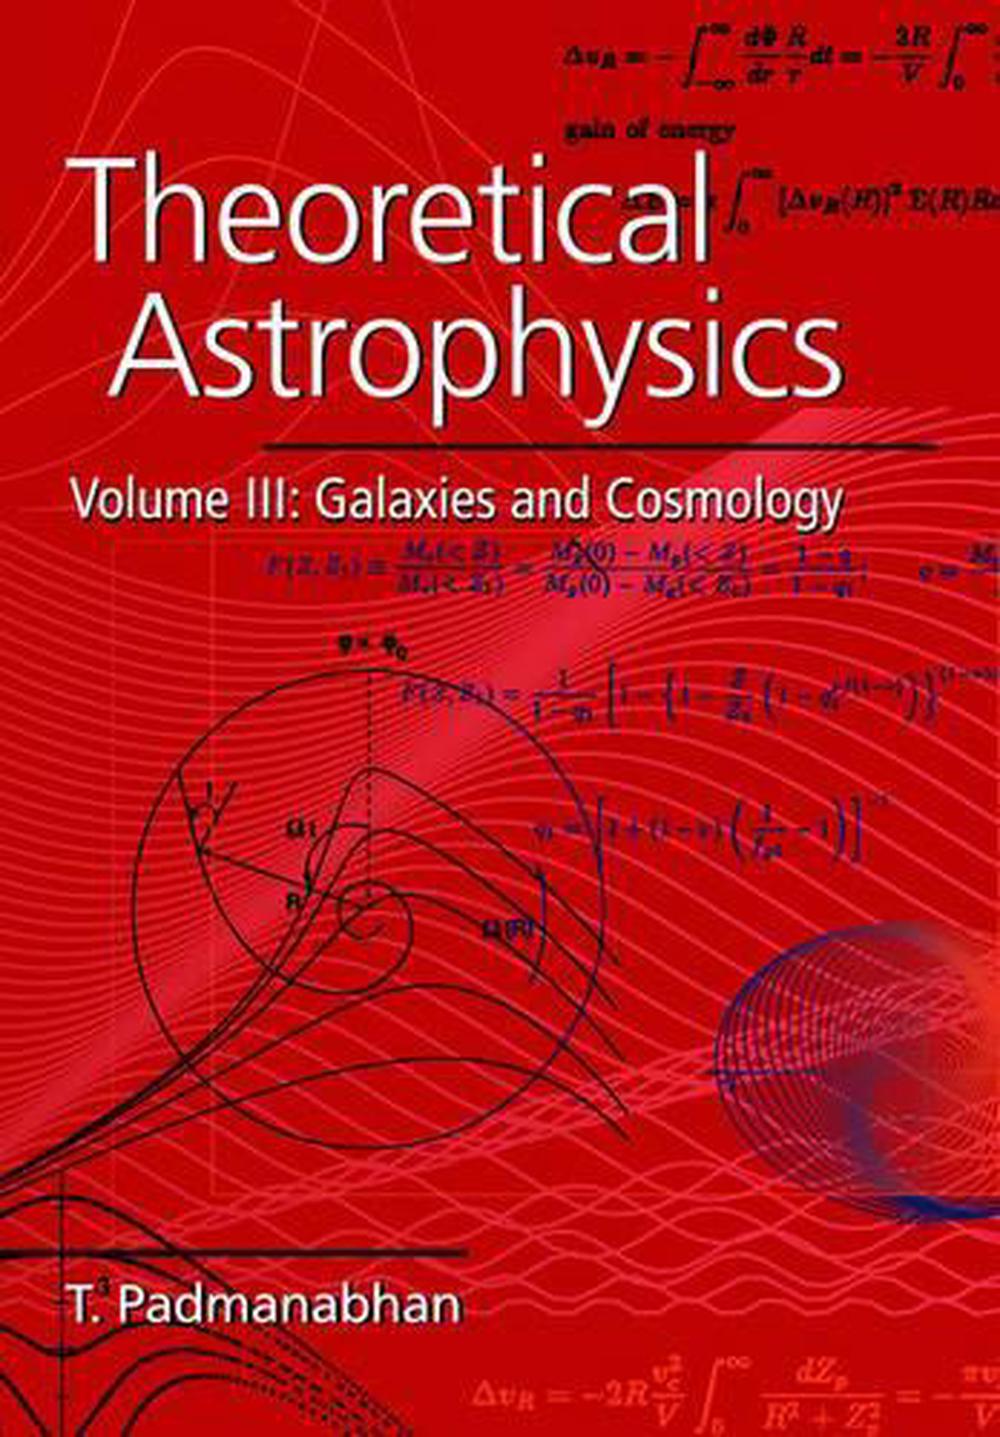 Theoretical Astrophysics: Volume 3: Galaxies and Cosmology by T. R. Padmanabhan 9780521566308 | eBay